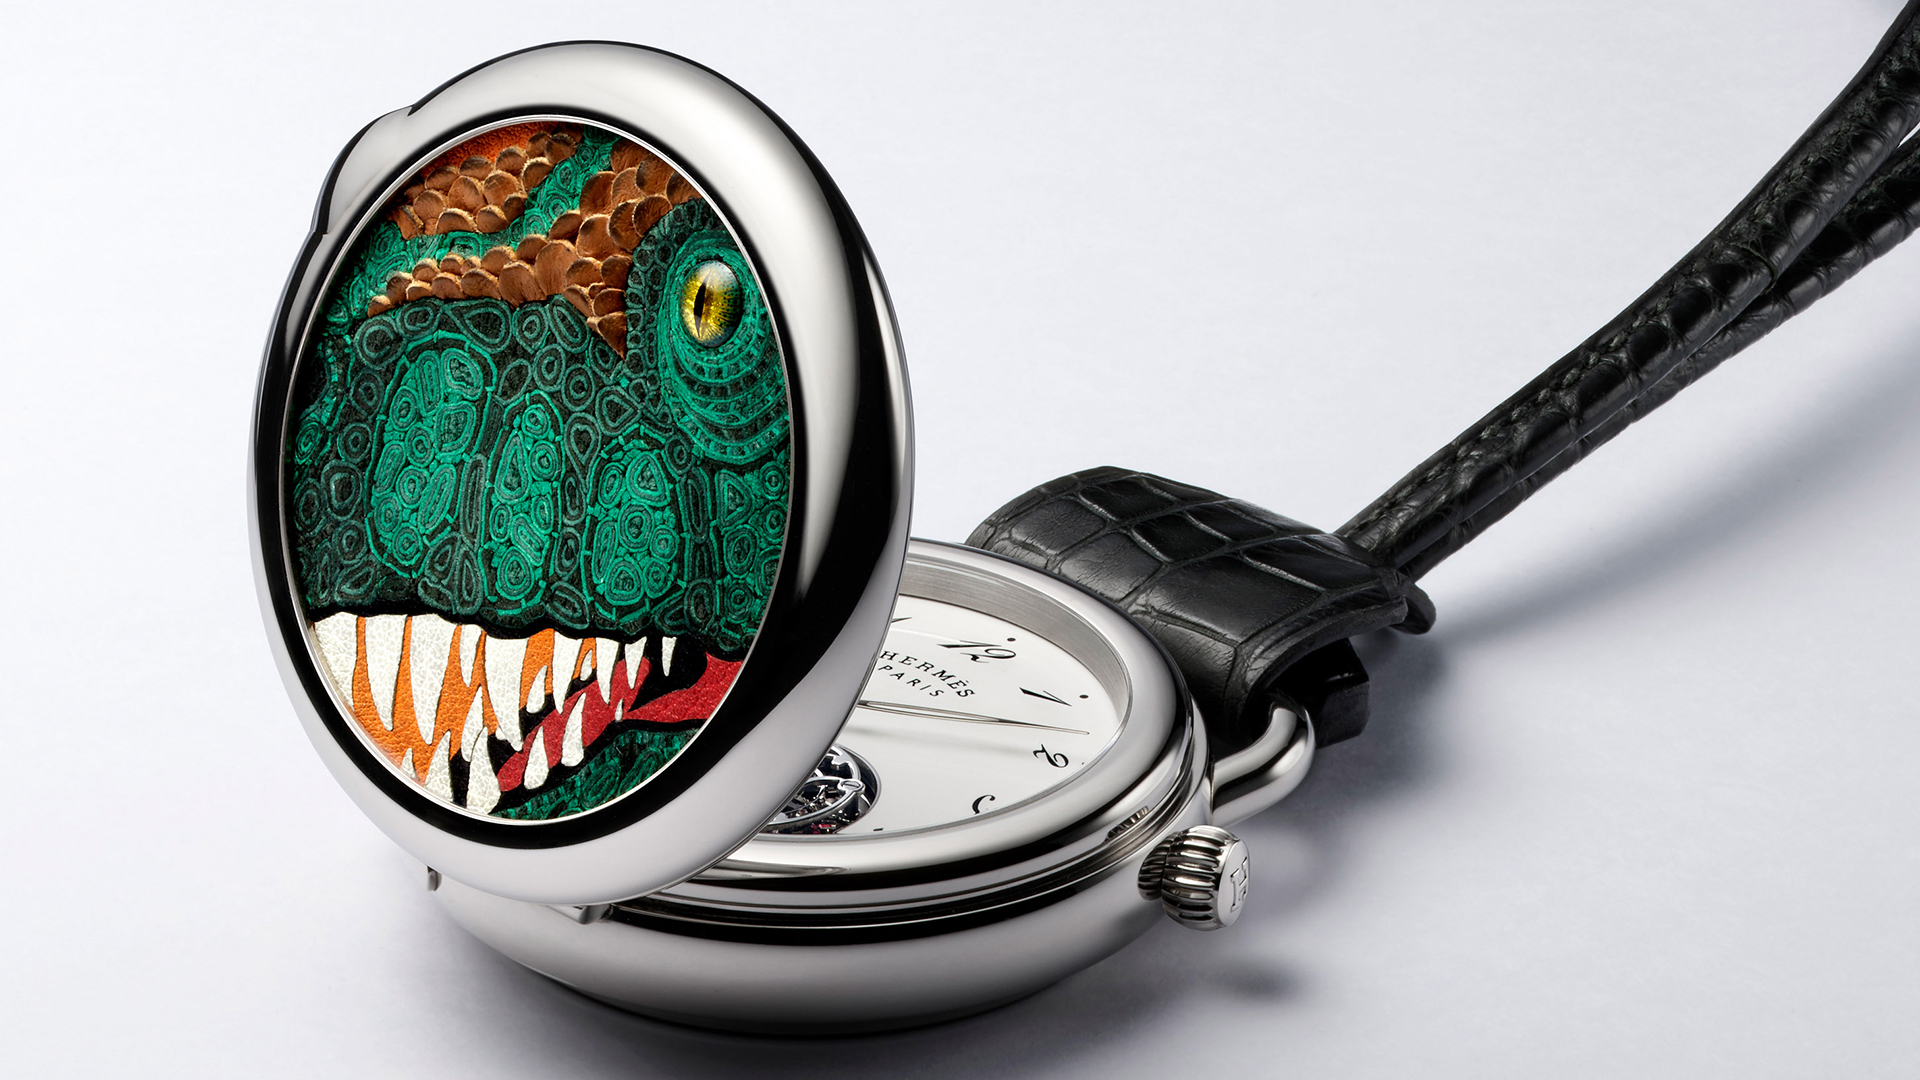 Hermès Debuts Unique Arceau Pocket Aaaaargh! Watch With Minute Repeater And Tourbillon